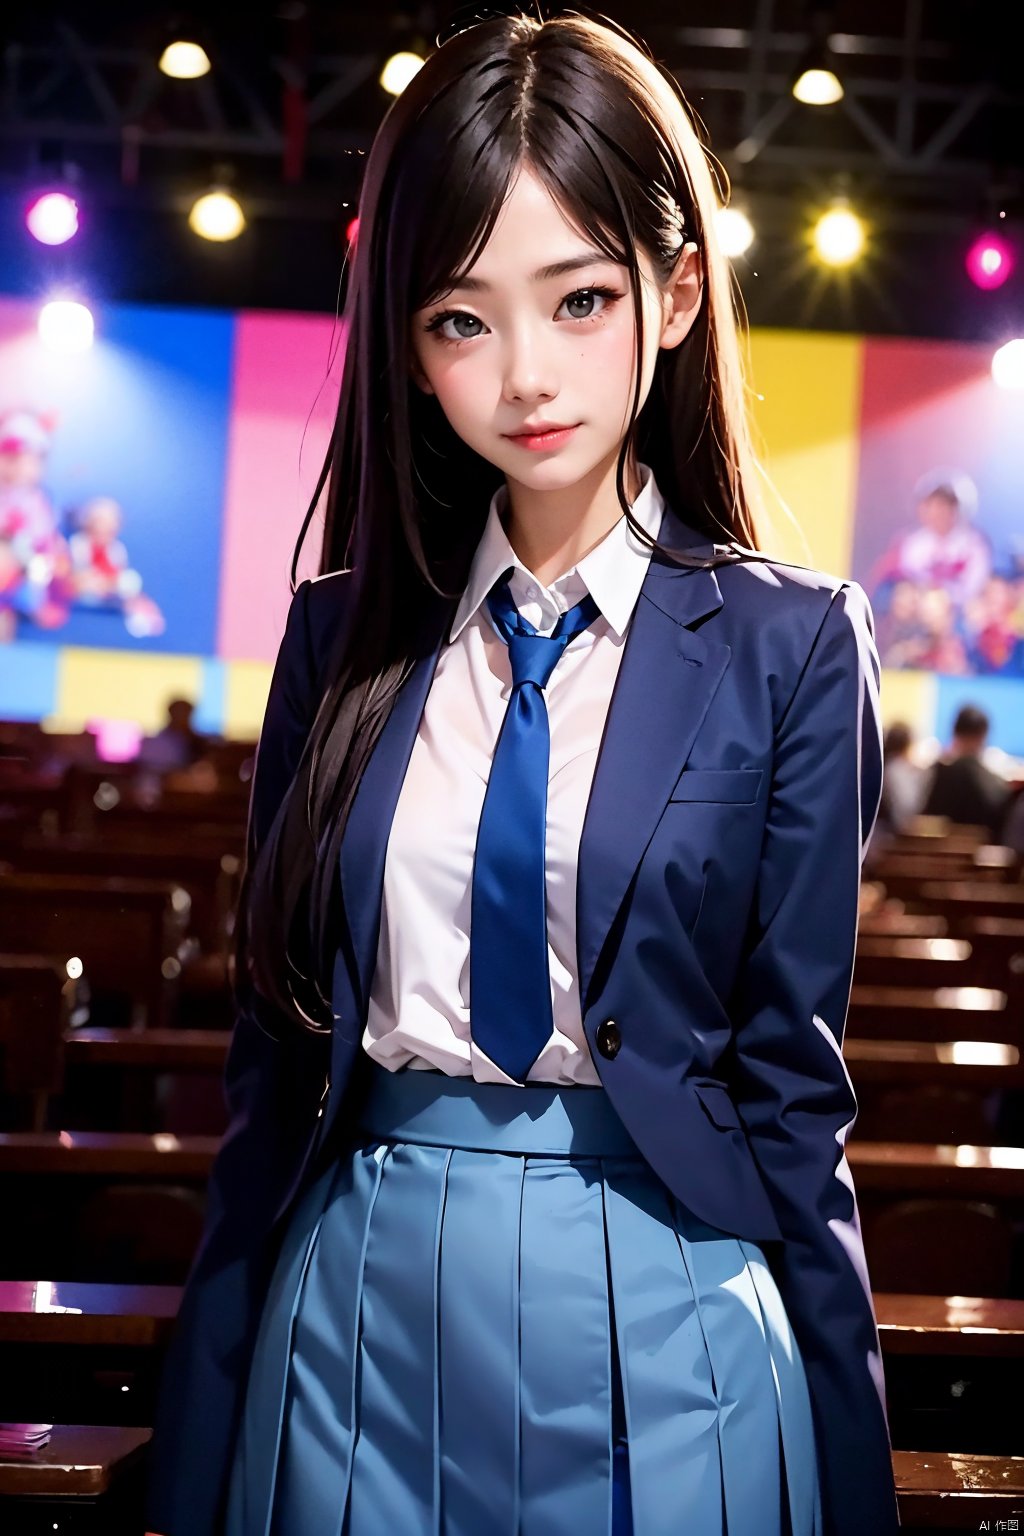  1 girl, solo, looking at the audience,, long hair,school_uniform,